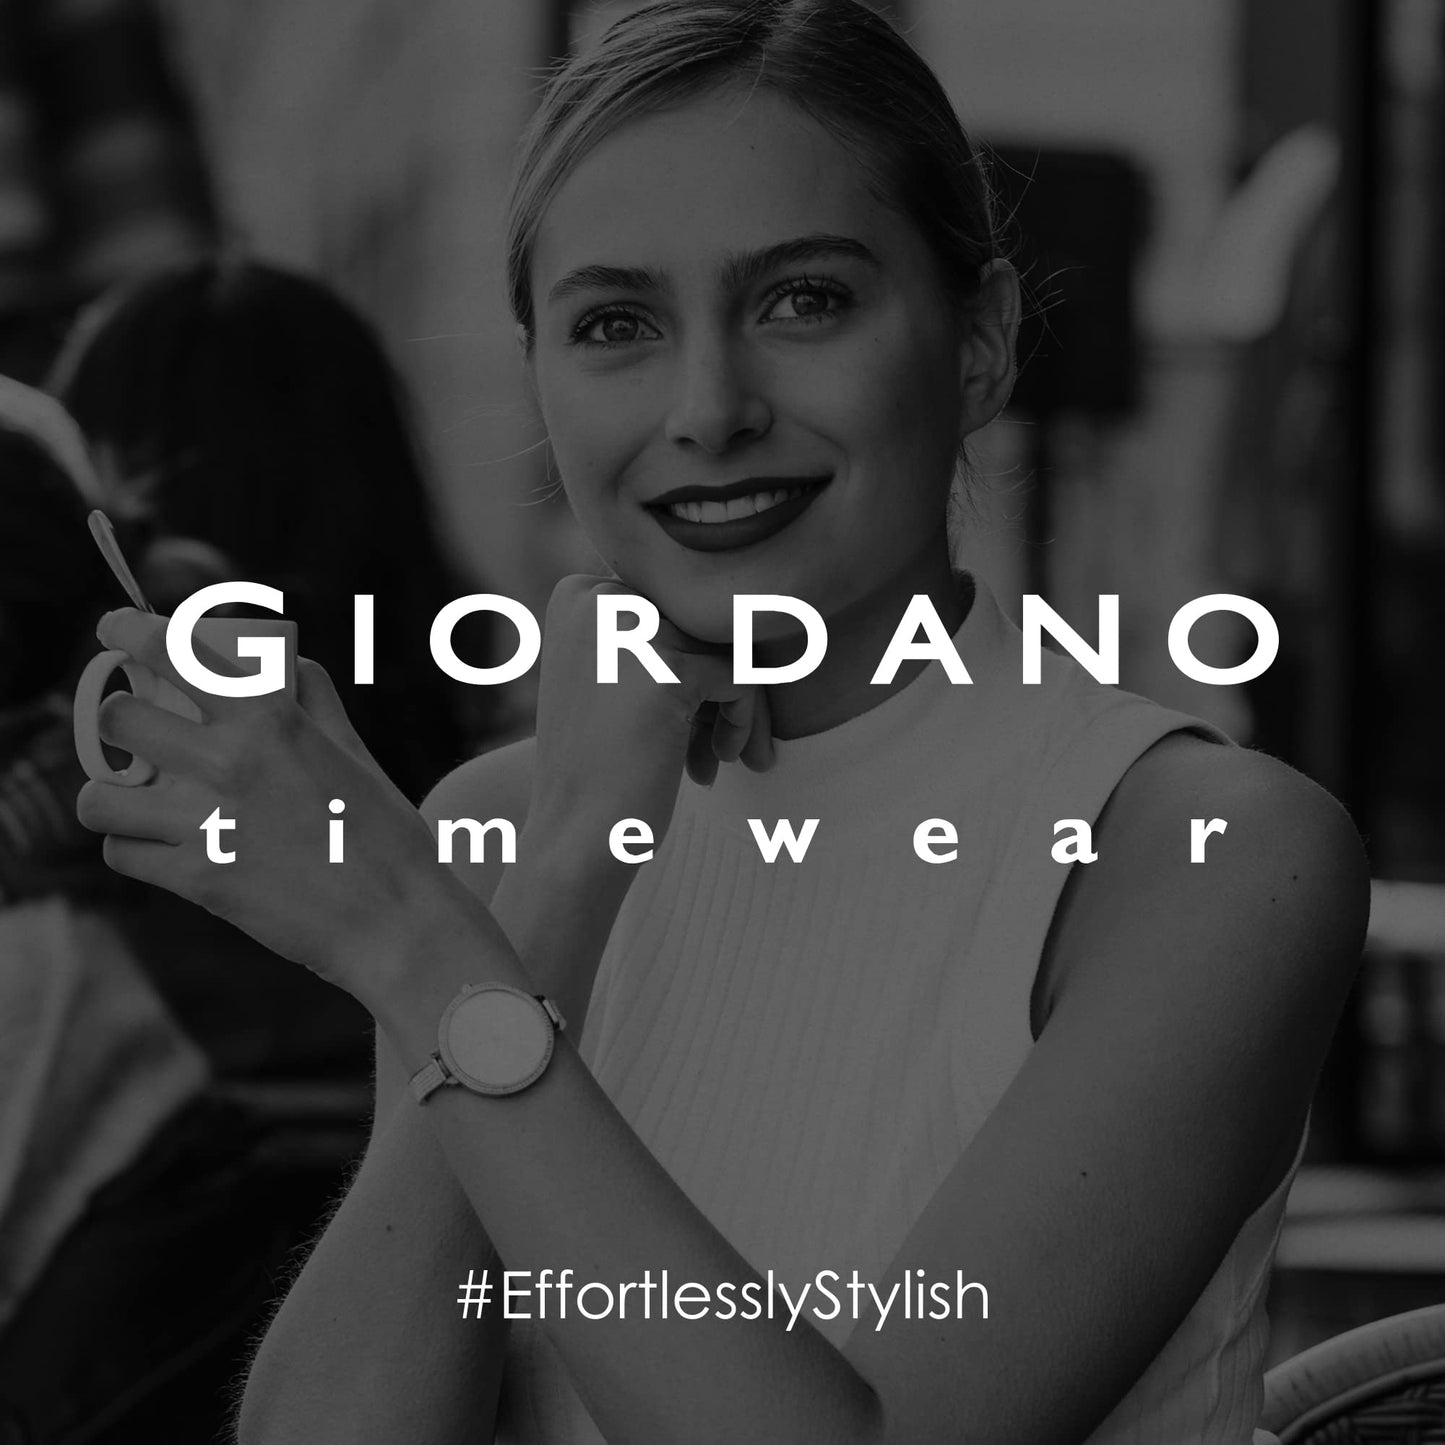 Giordano Analog Stylish Wrist Watch for Women Water Resistant Classy Dial, Stainless Steel Case to Compliment Your Look | Ideal Gift for|Ladies|Girls - A2056